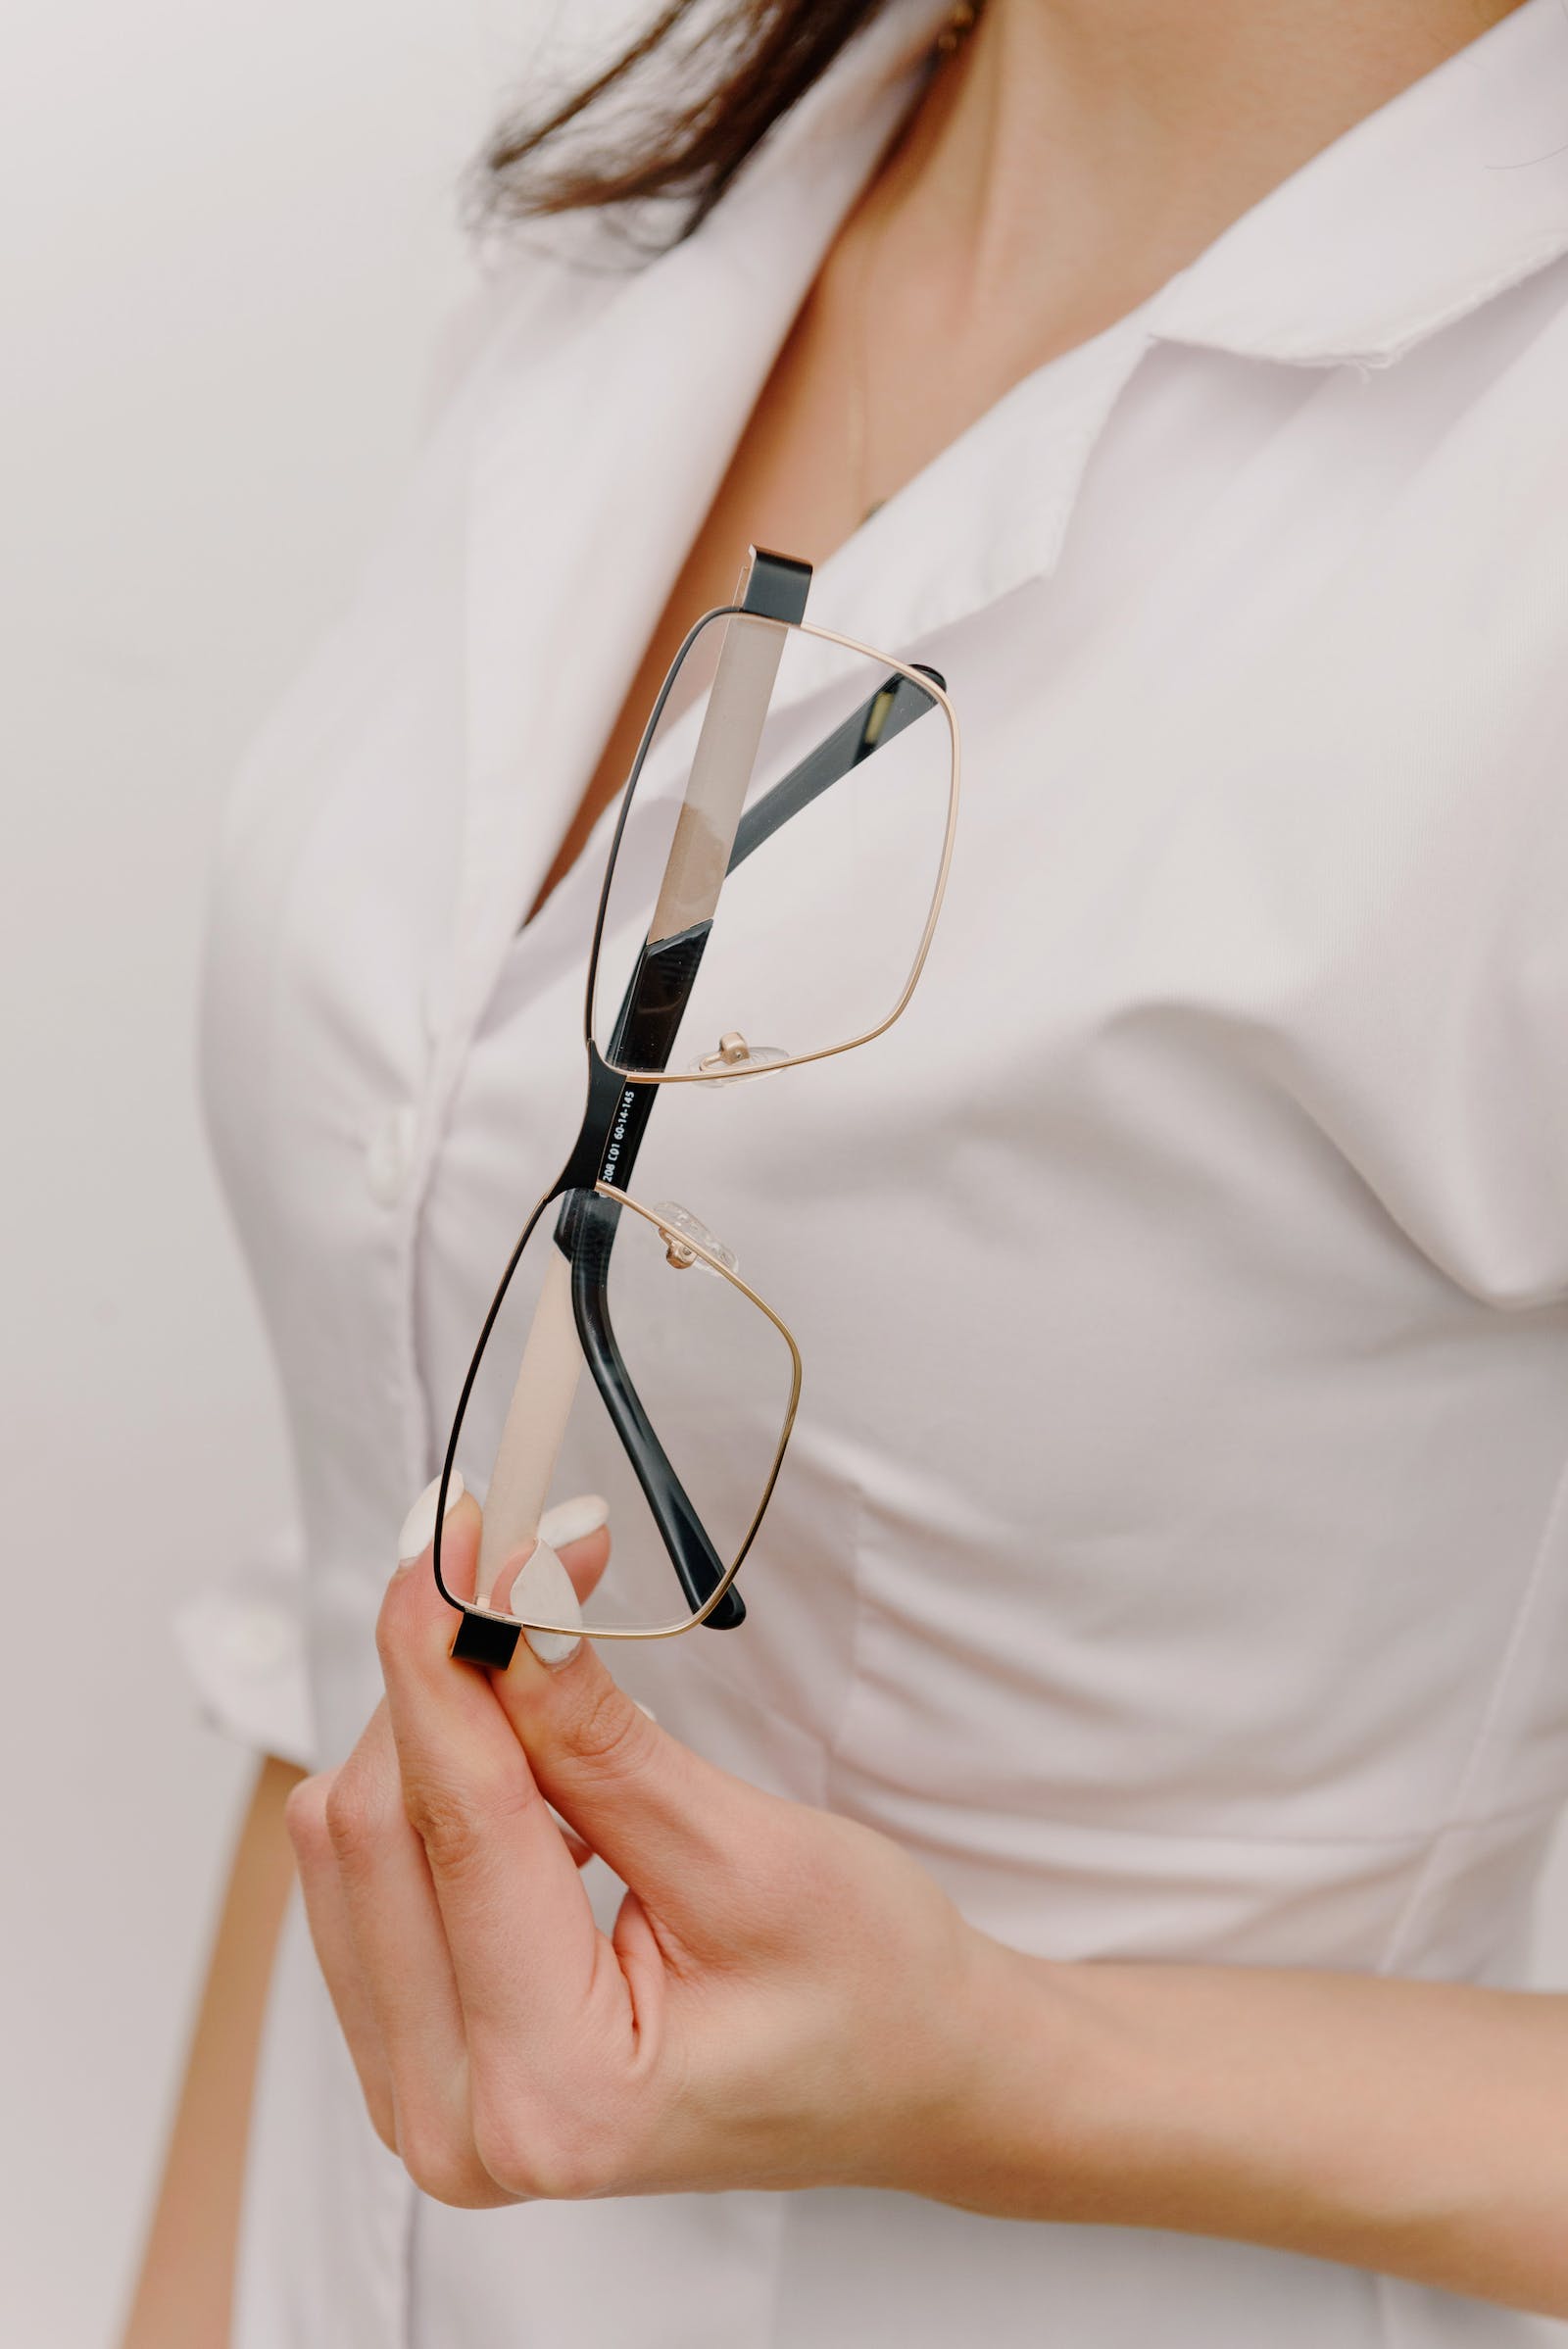 What is an Optometrist?